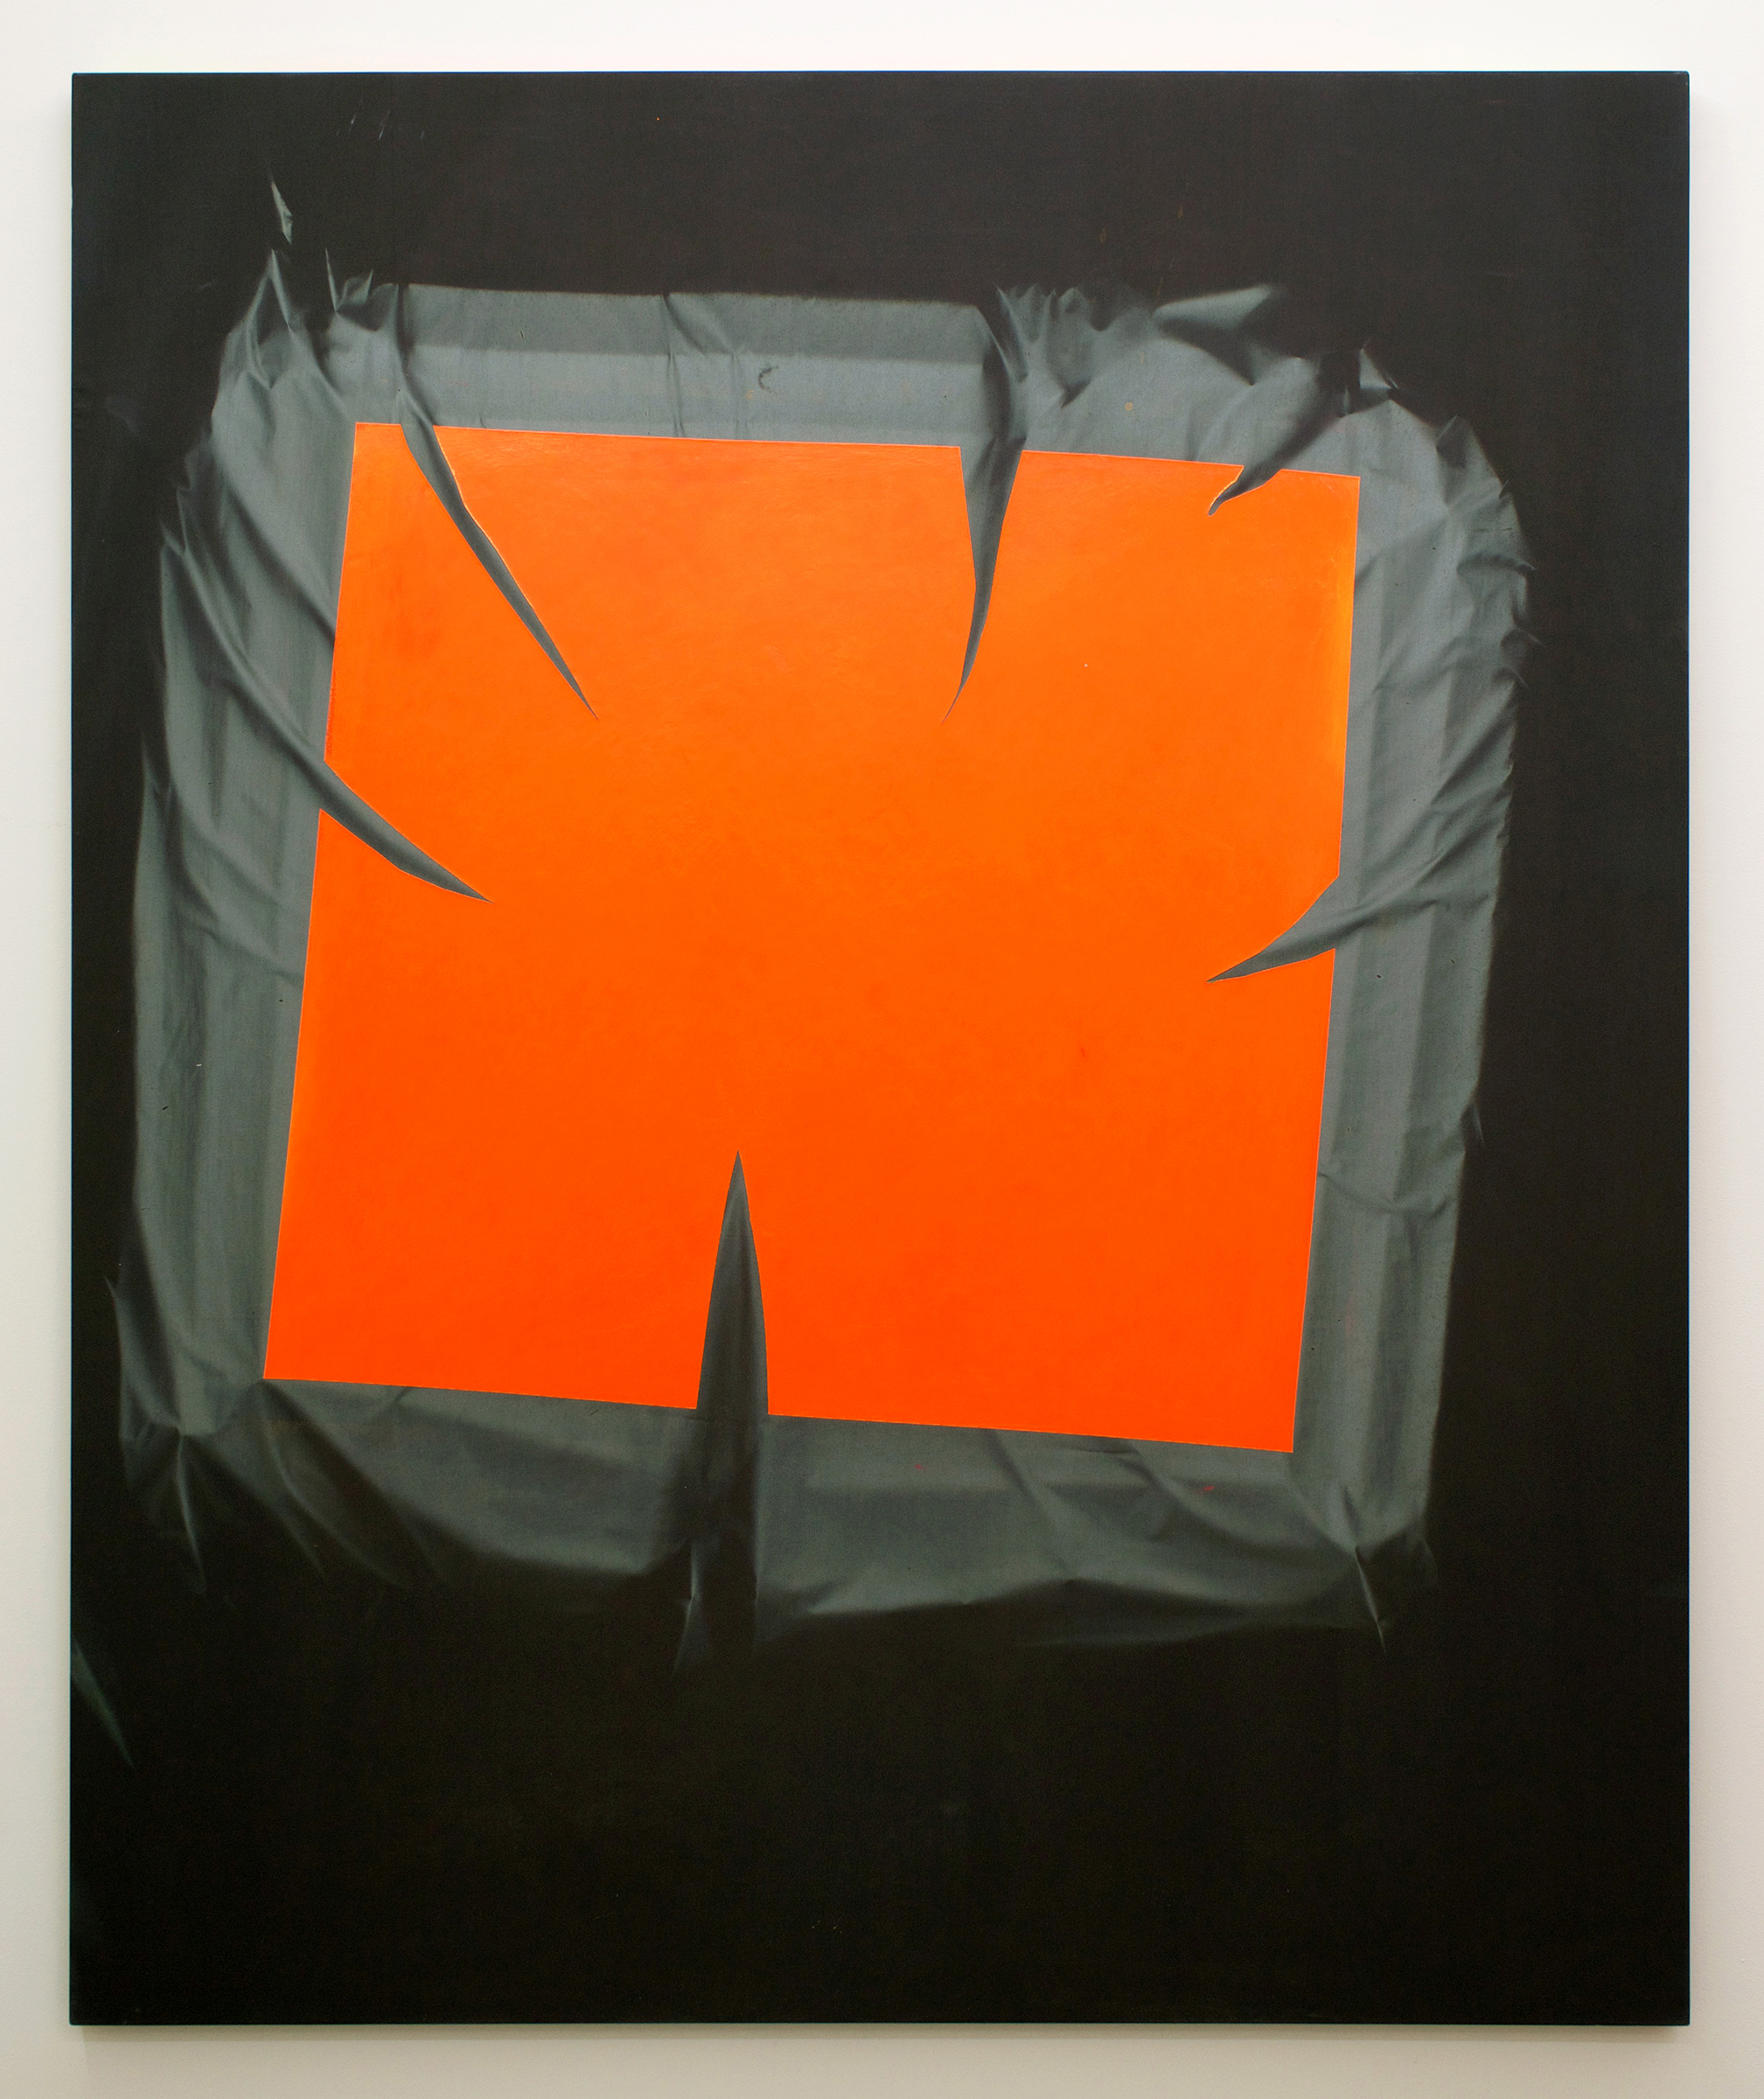   CHRIS DUNCAN   Skylight – Orange &amp; Gray (Fall-Spring 2016) Six-Month Exposure/Oakland , 2016, sun, time and acrylic on fabric, 68" x 55 3/4" 